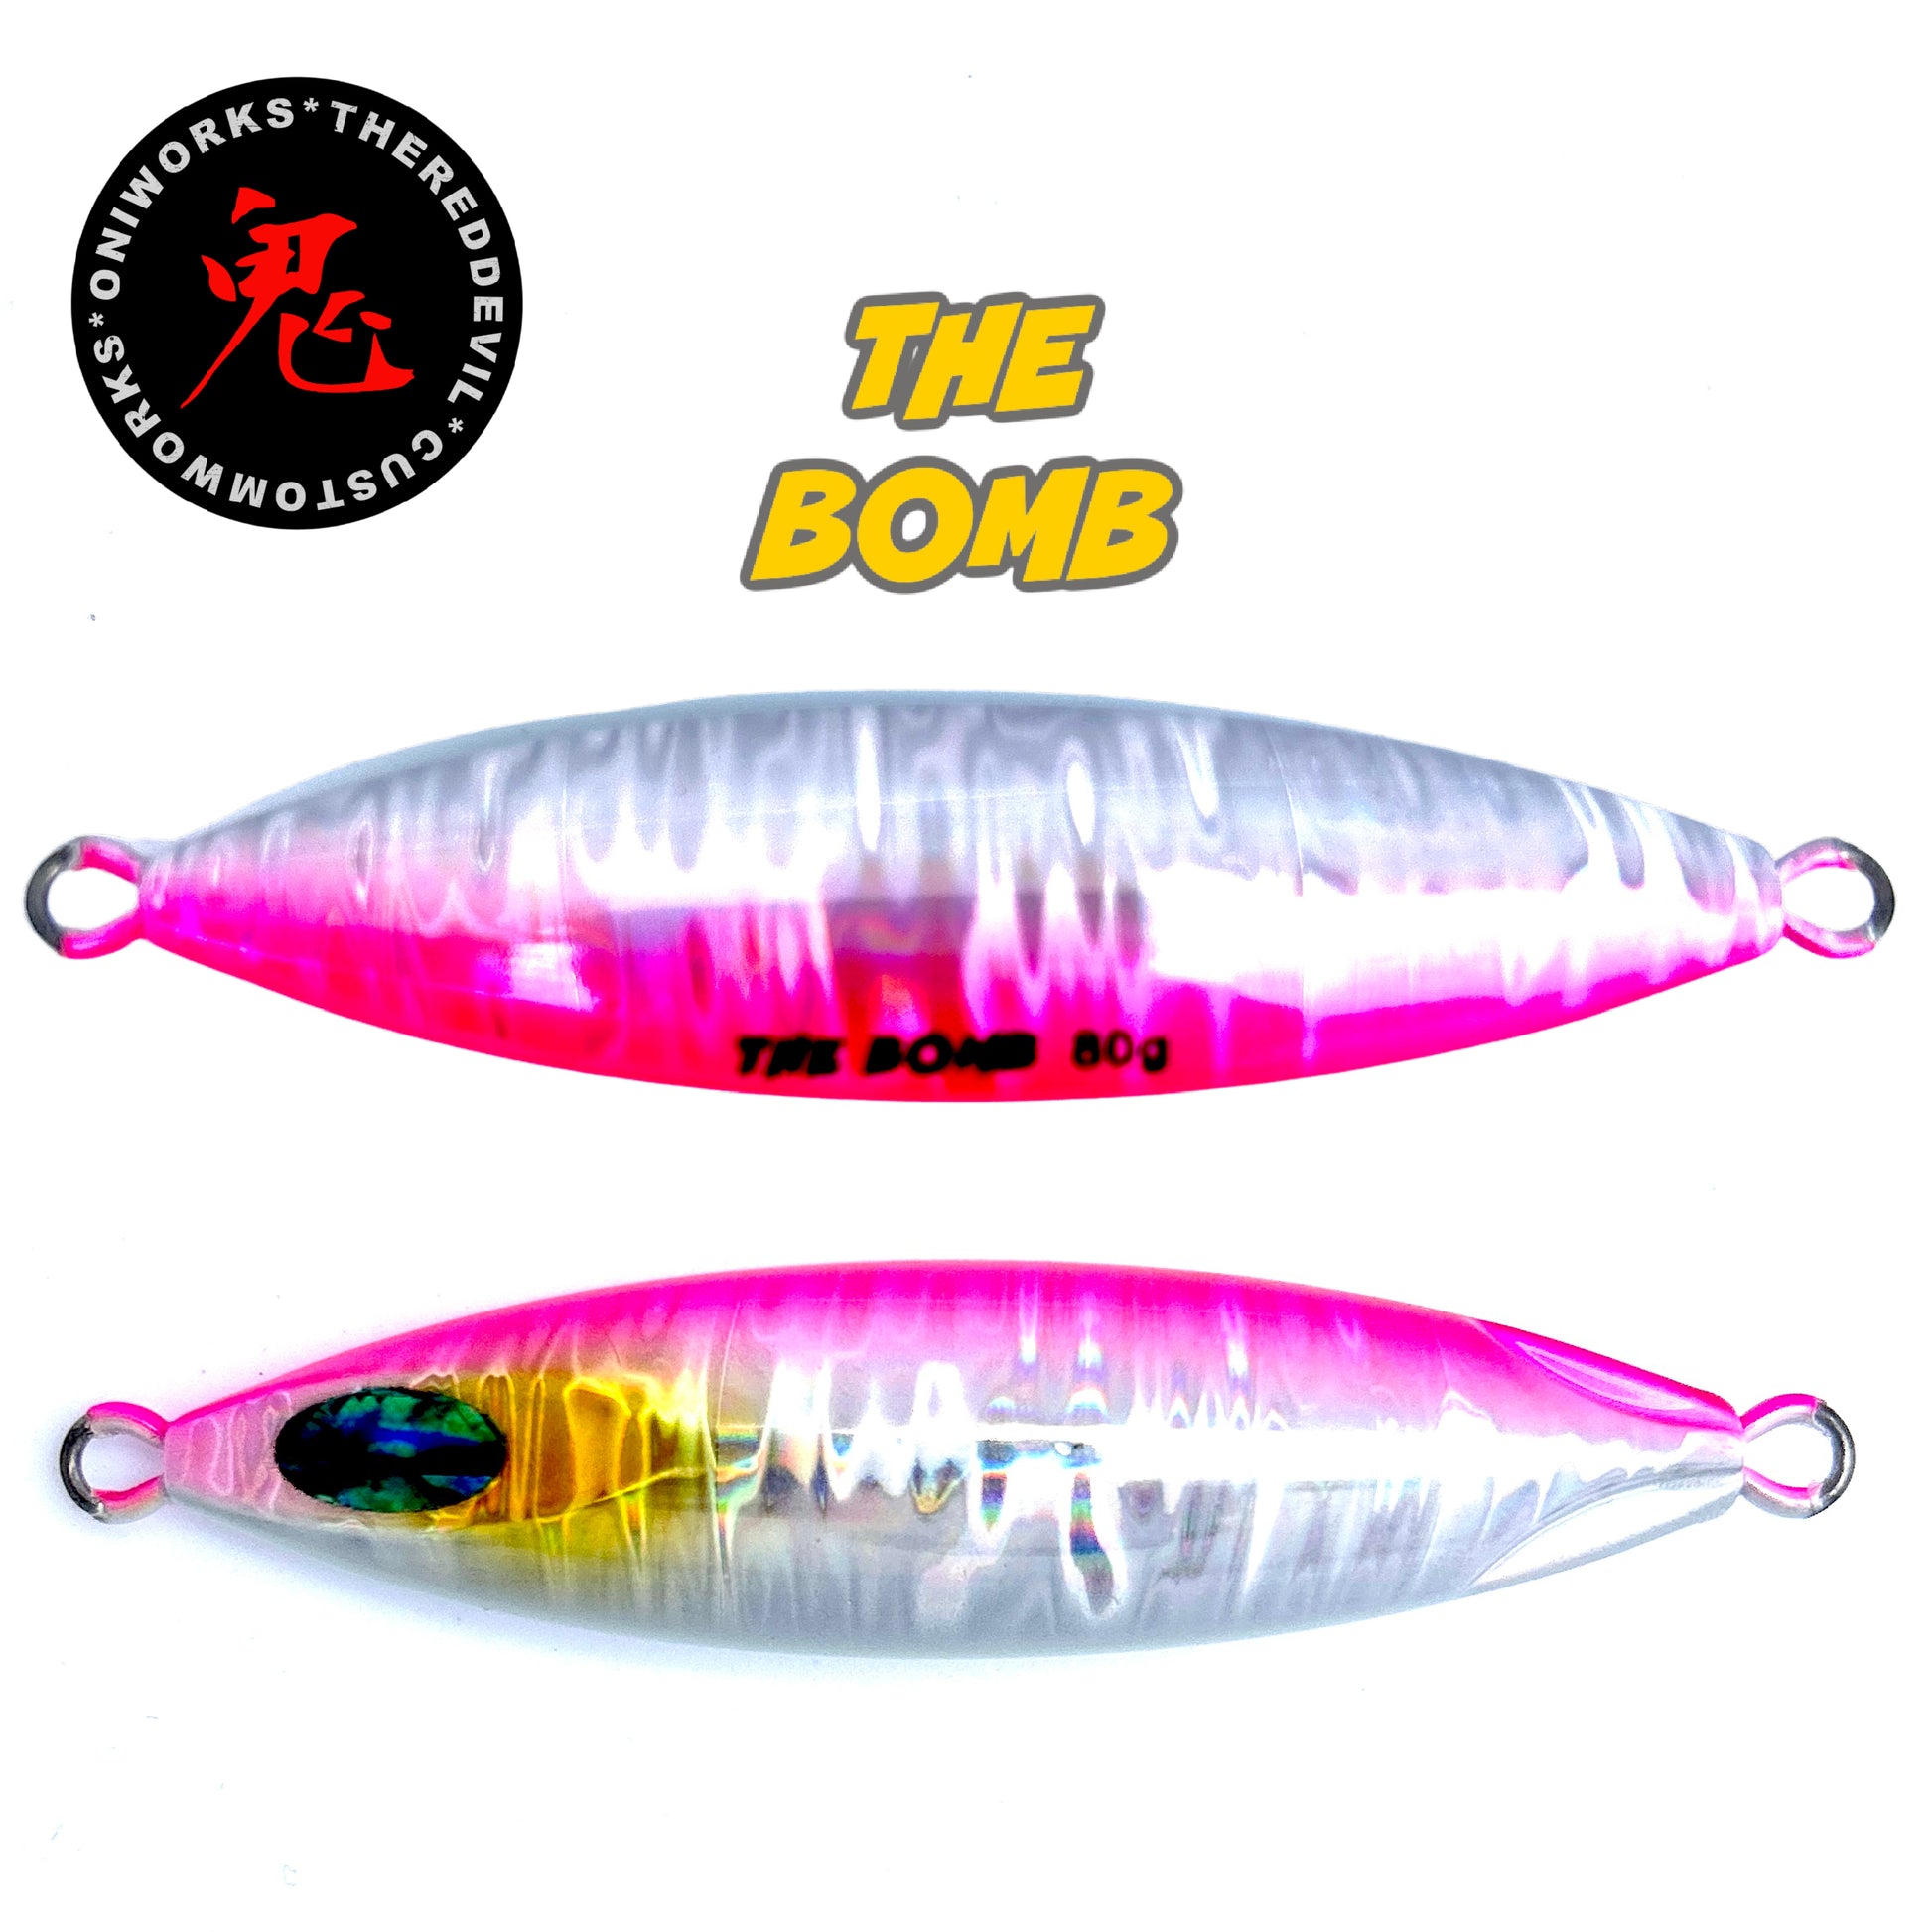 Jig - OniWorks - The Bomb 80g